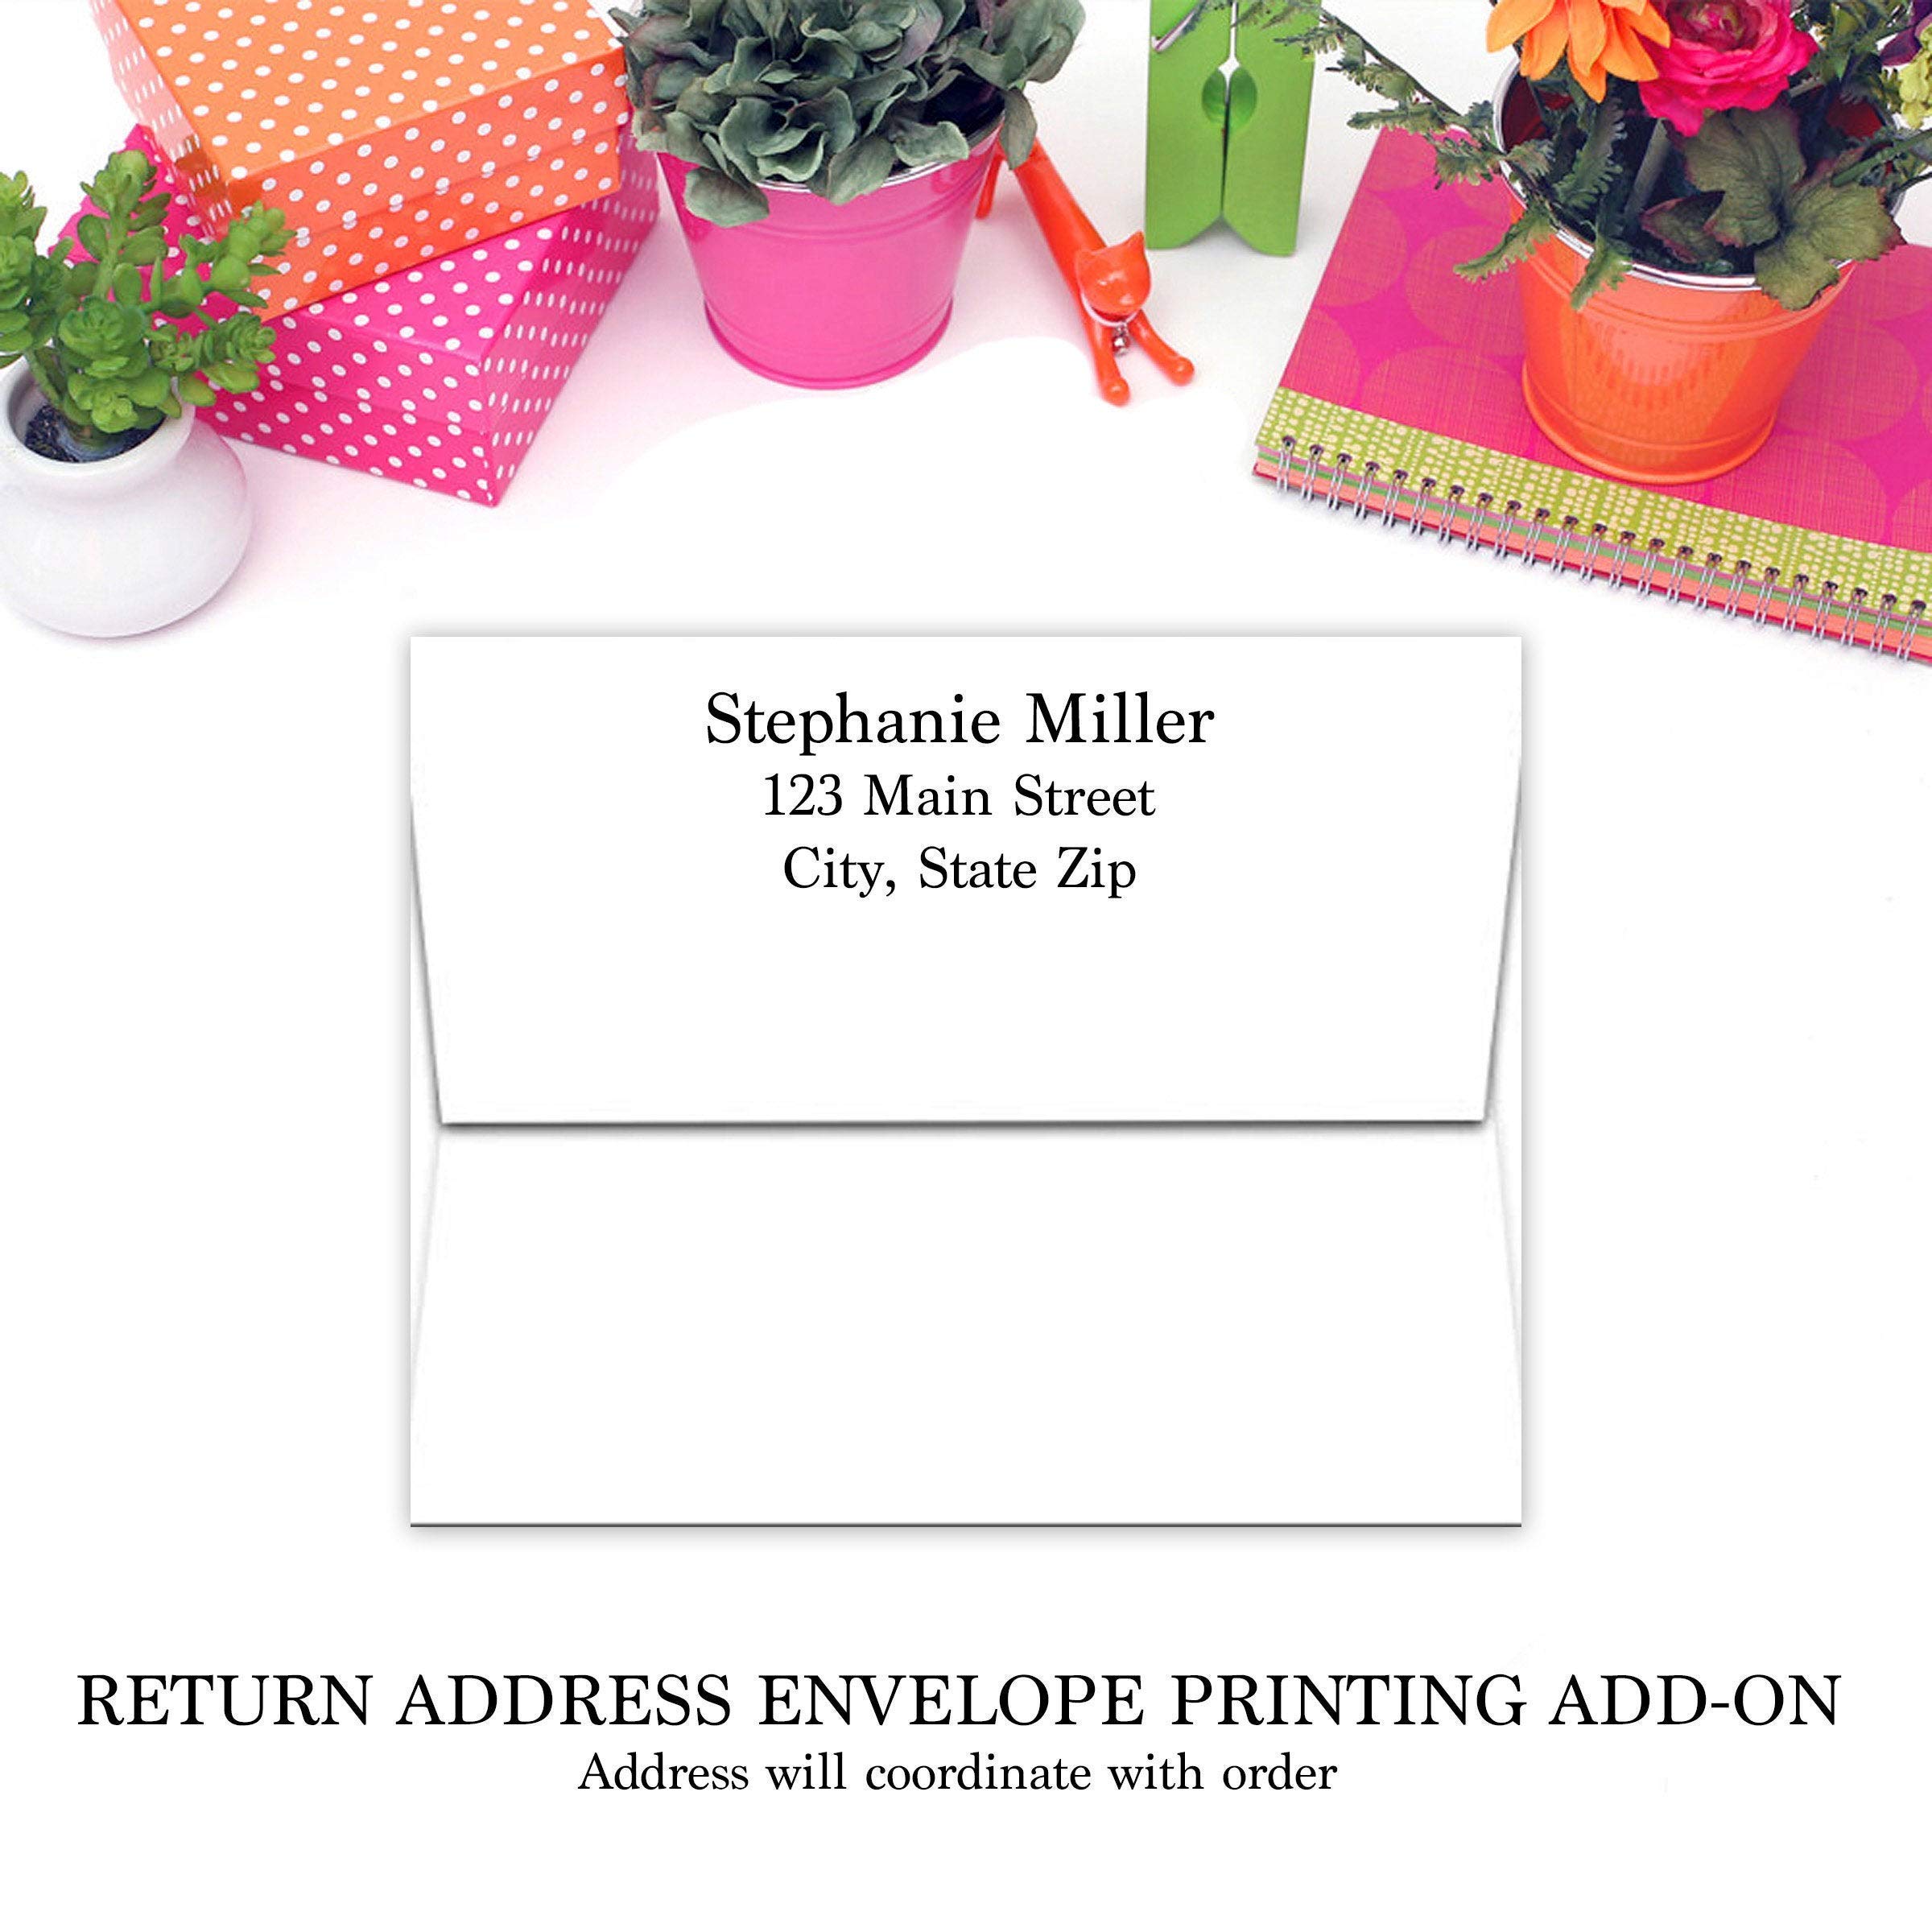 Sympathy Acknowledgement Cards, Funeral Thank You and Bereavement Notes Personalized with Envelopes